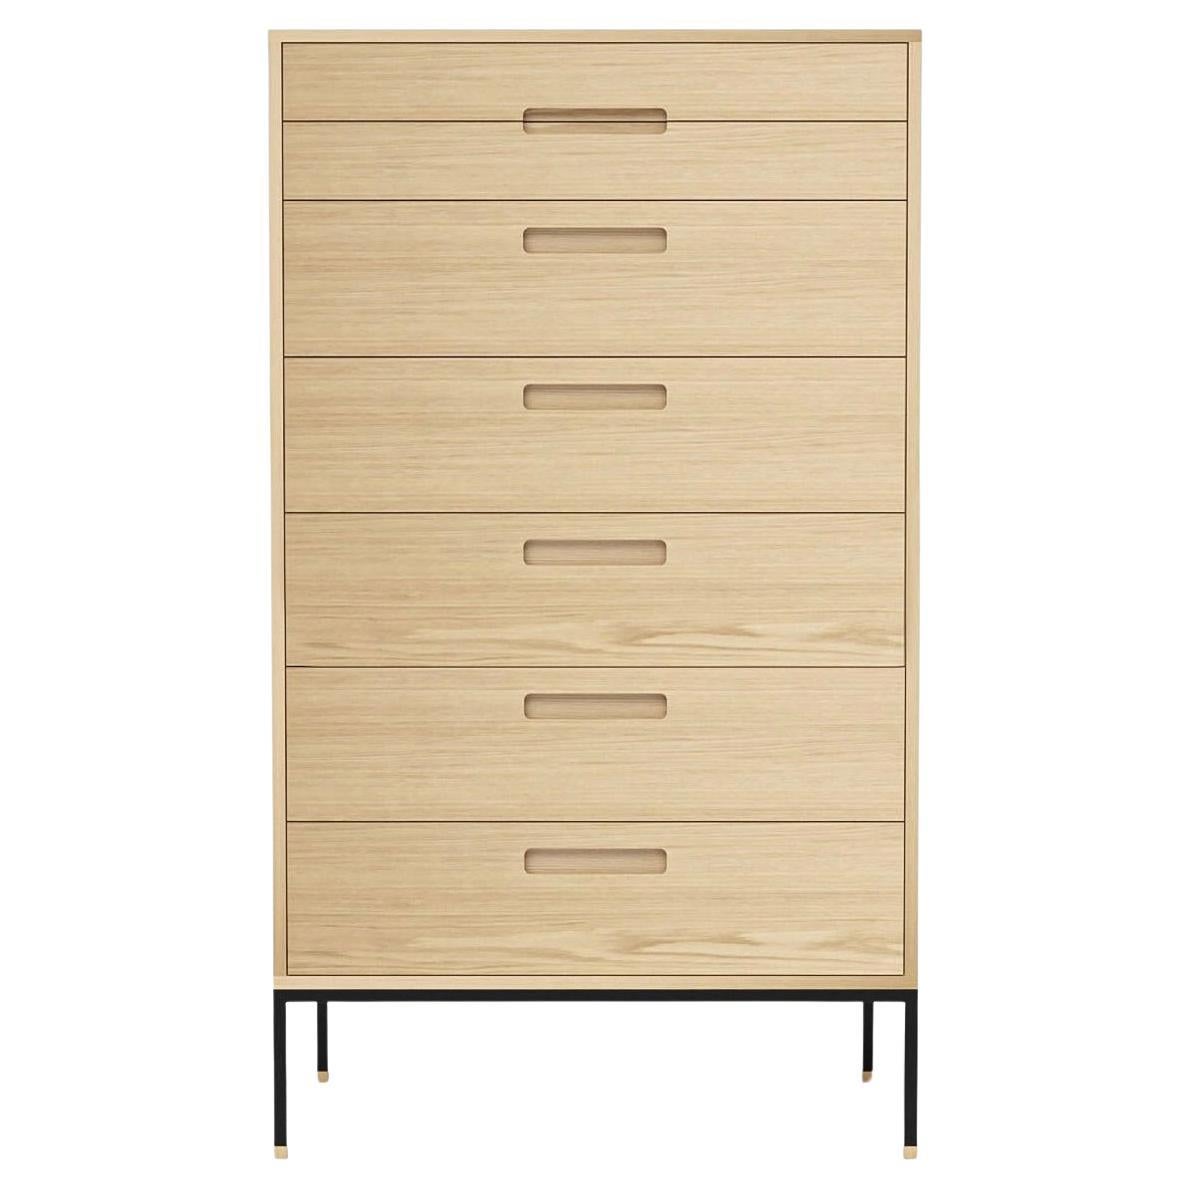 Chest of drawers model Cosmopol. 5 drawers